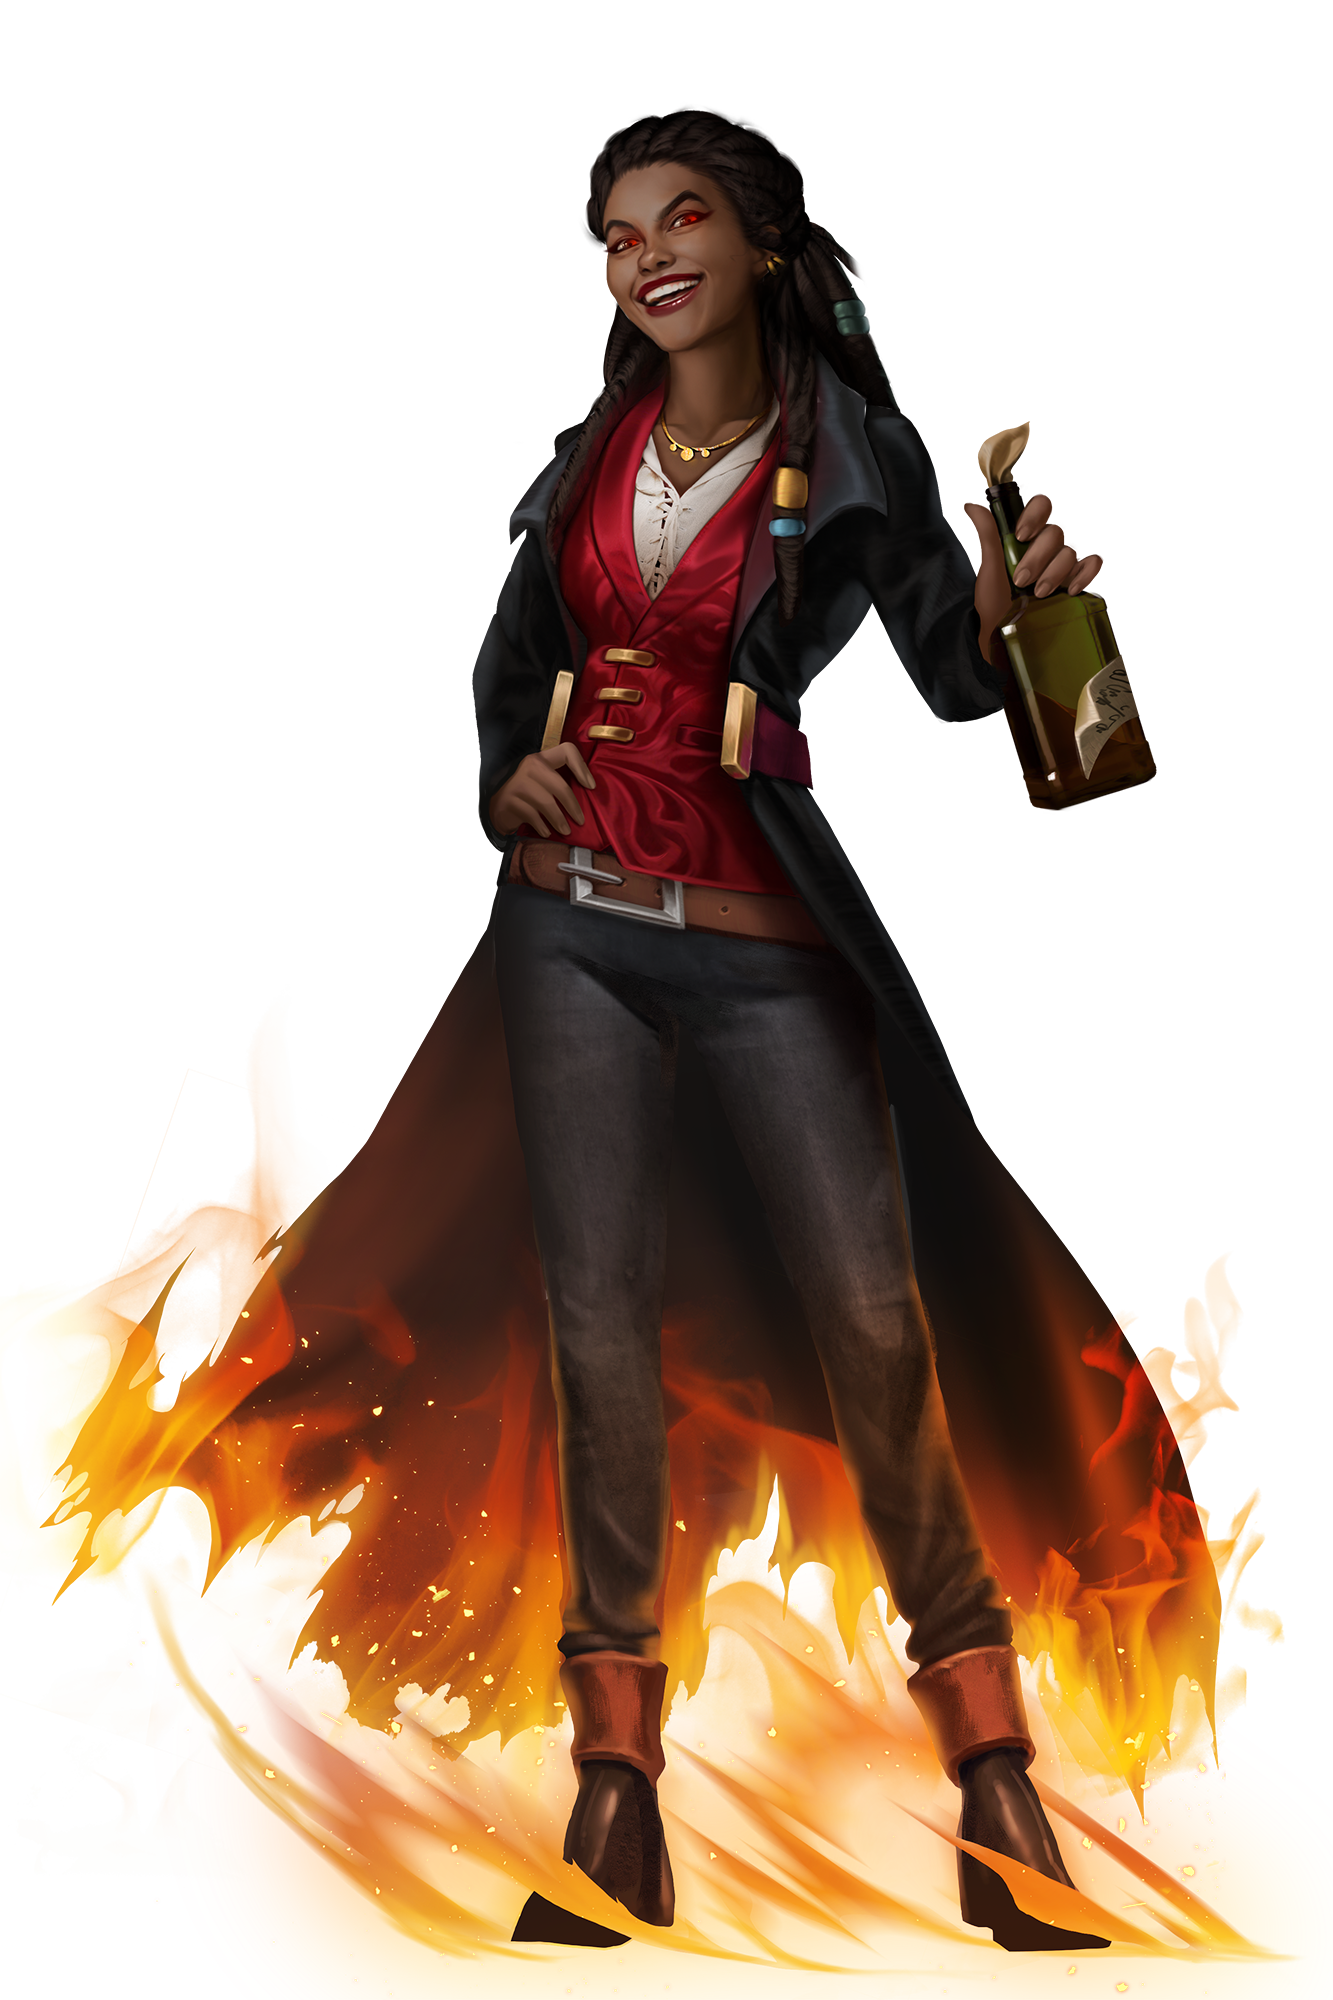 Lubaiko, goddess of wildfire, inspiration, and turmoil. She resembles a human woman wearing a stylish coat with flames licking at the coat’s tail